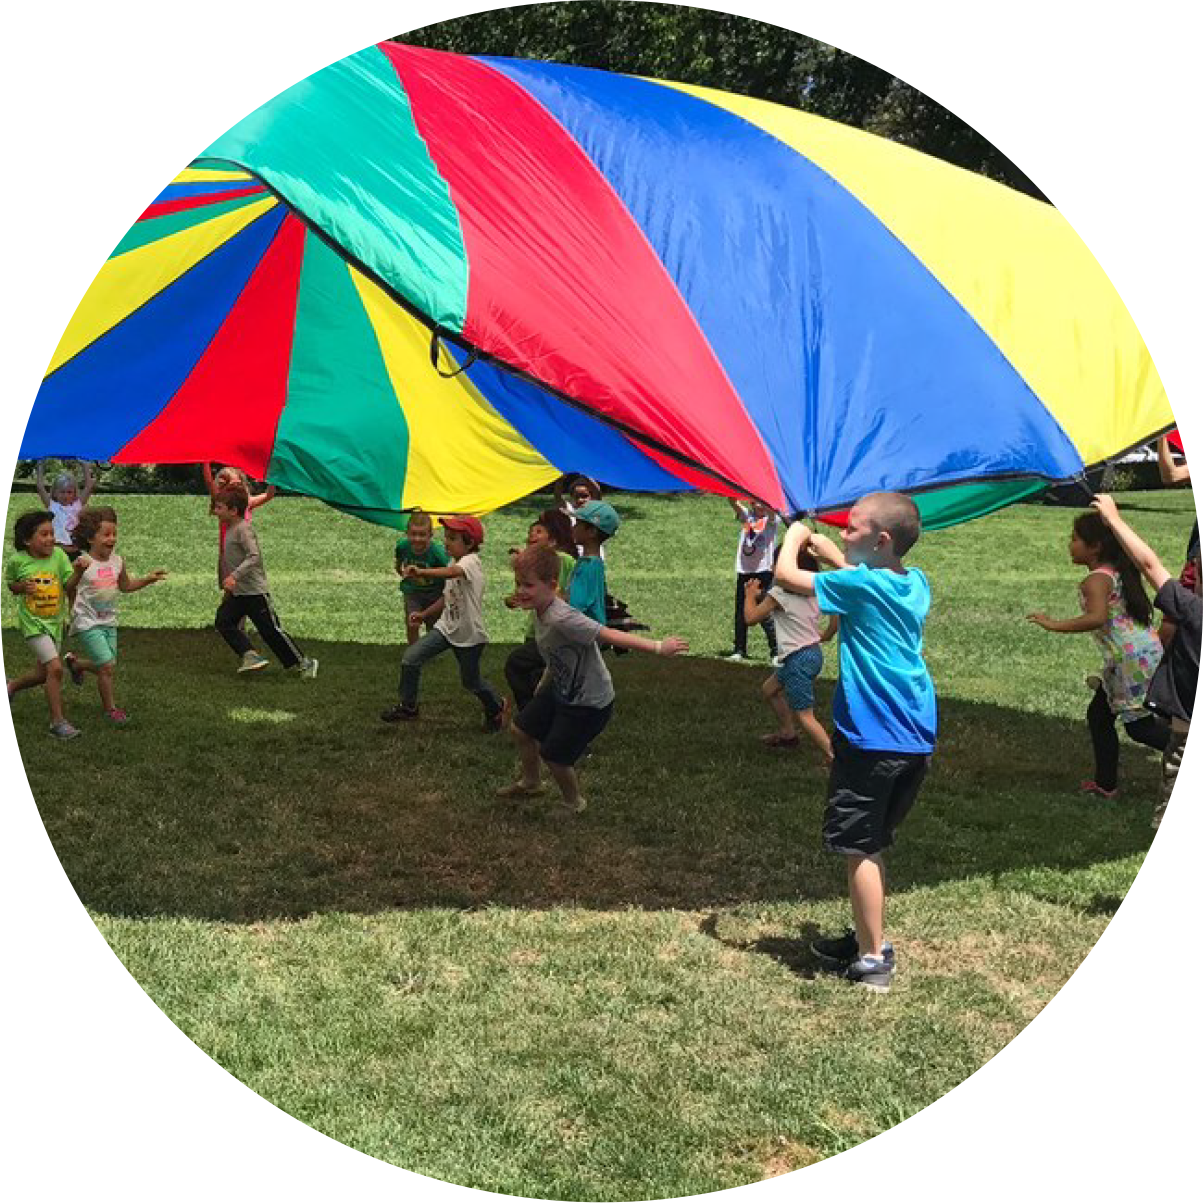 children playing in field with colorful parachute